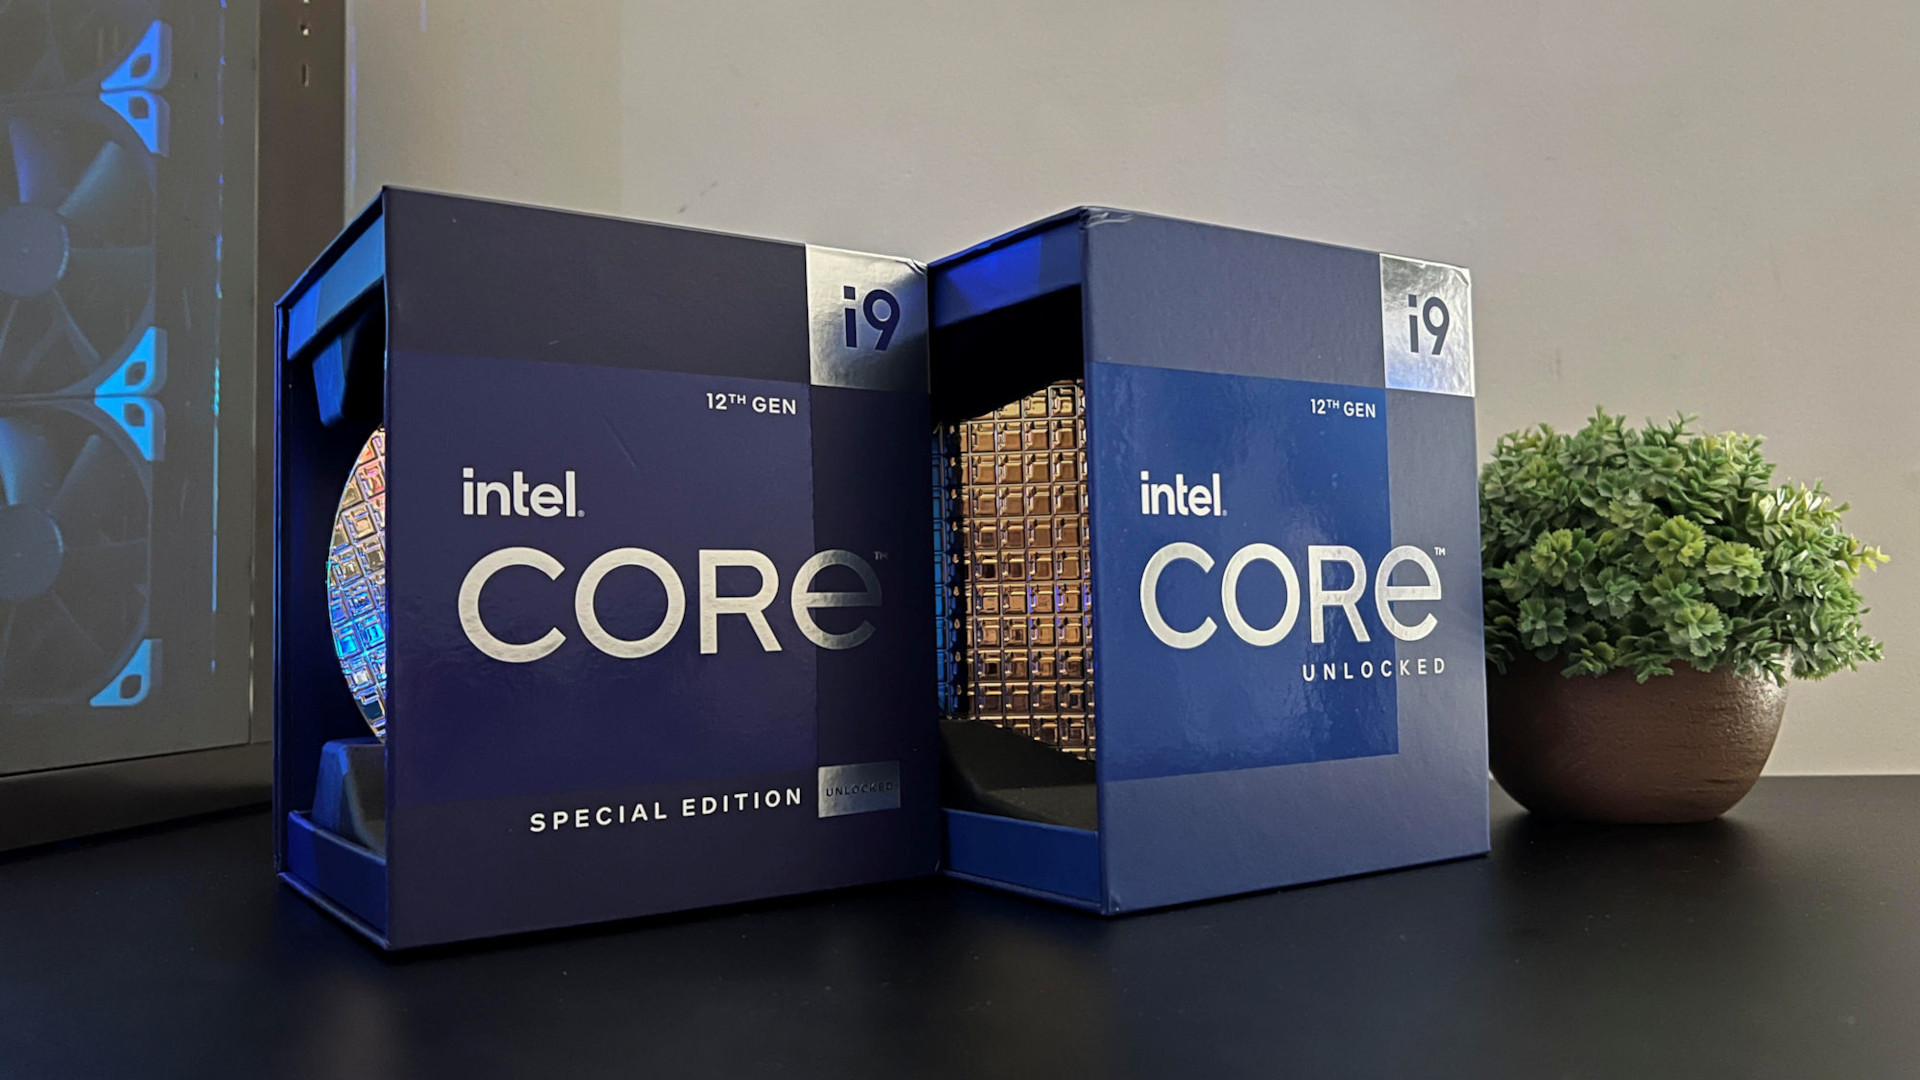 Intel Core i9-12900KS CPUs ship to customers ahead of launch